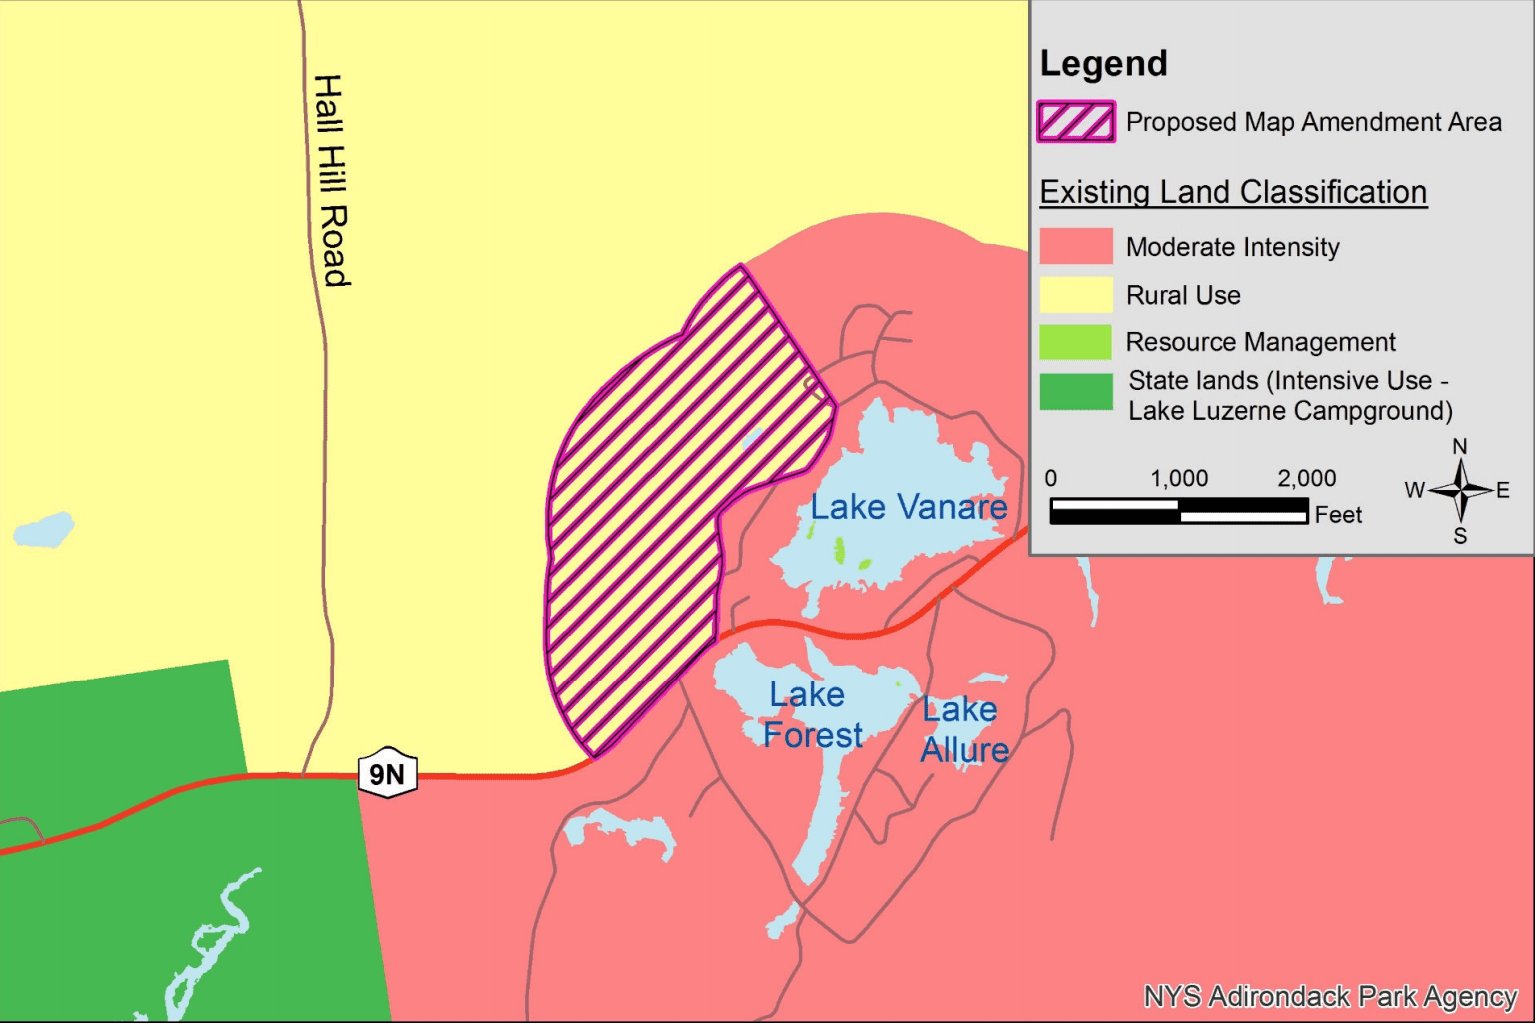 This Adirondack Park Agency map shows approximately where the Town of Lake Luzerne proposed a map amendment change.